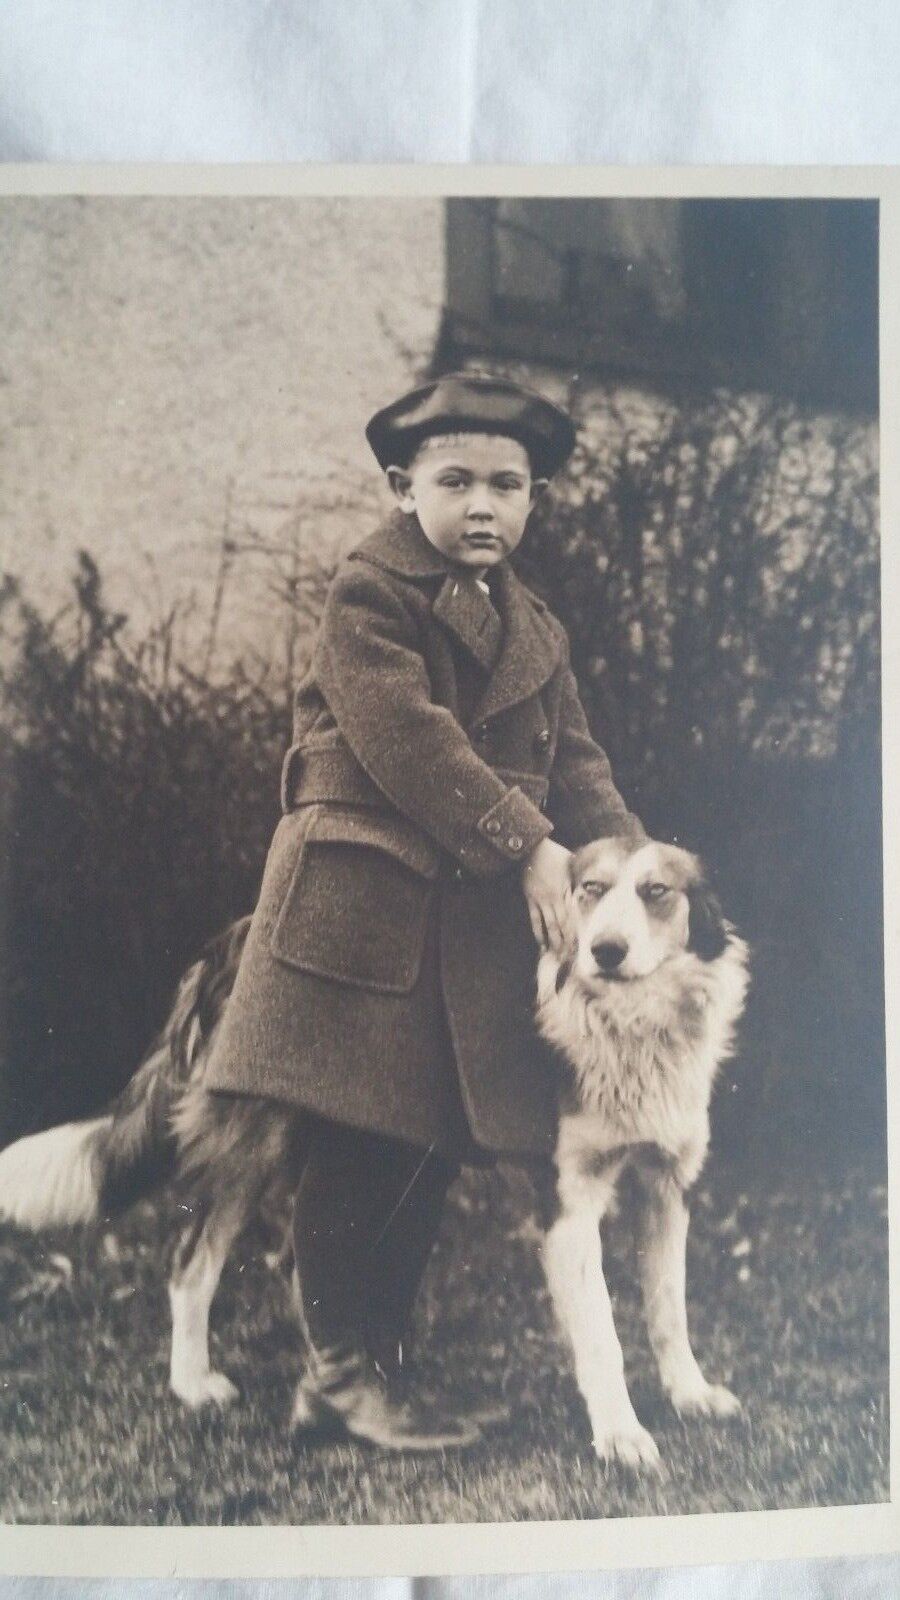 Original Antique Old Vintage Photograph - Young Boy with Large Dog 5x7 Sepia